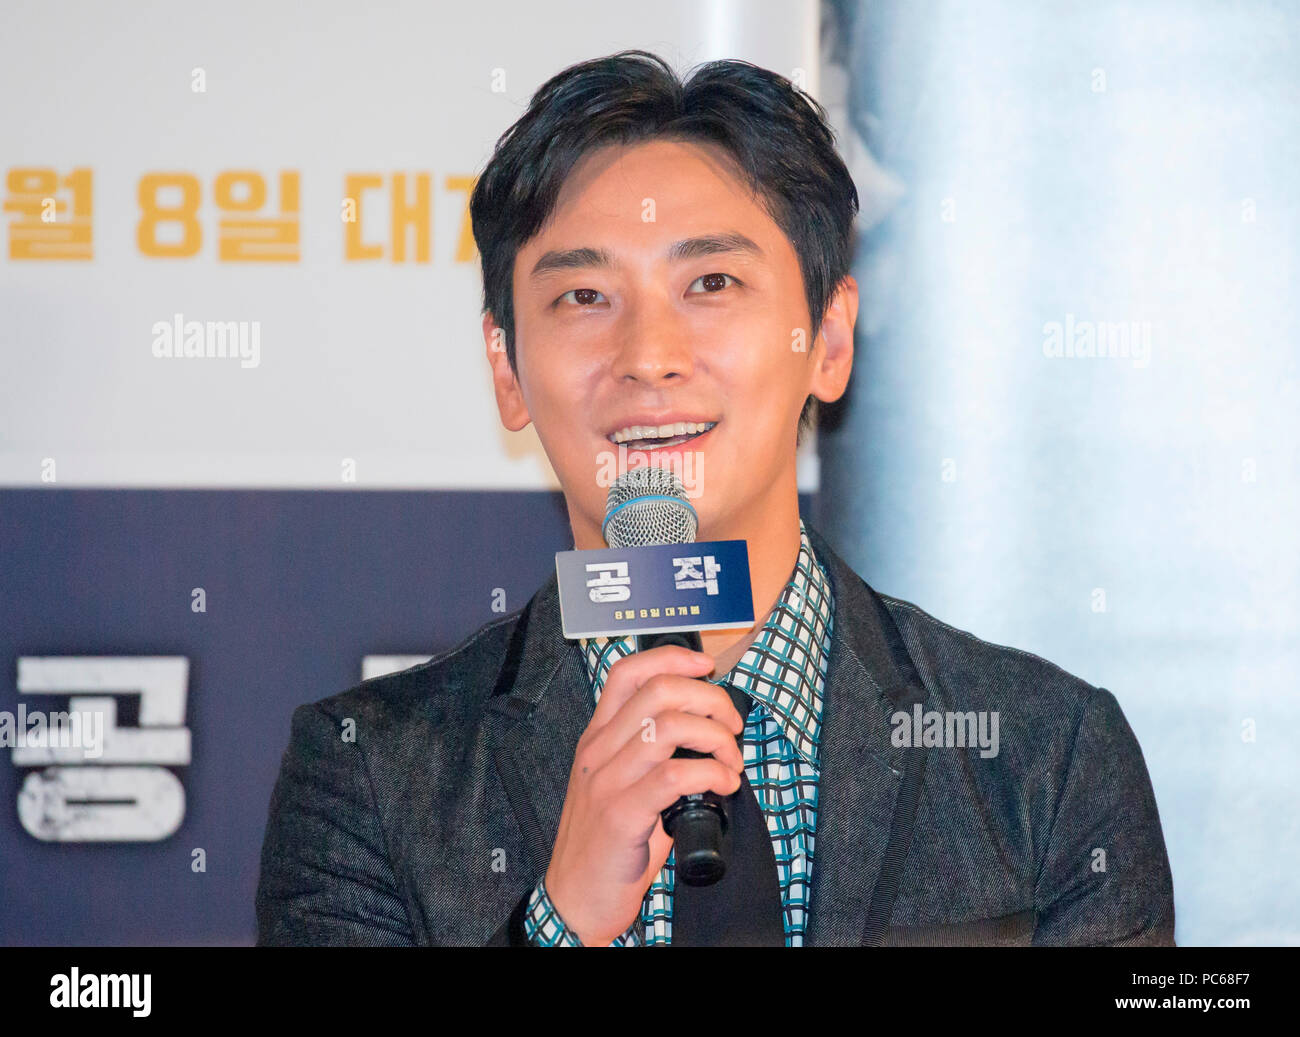 Ju Ji-Hoon, July 31, 2018 : South Korean actor Ju Ji-Hoon attends a press conference for his new film 'The Spy Gone North' at a theatre in Seoul, South Korea. The spy film tells the story of a South Korean spy who goes undercover as a businessman in North Korea in the 1990s to infiltrate North's nuclear facilities using the codename 'Black Venus'. Credit: Lee Jae-Won/AFLO/Alamy Live News Stock Photo